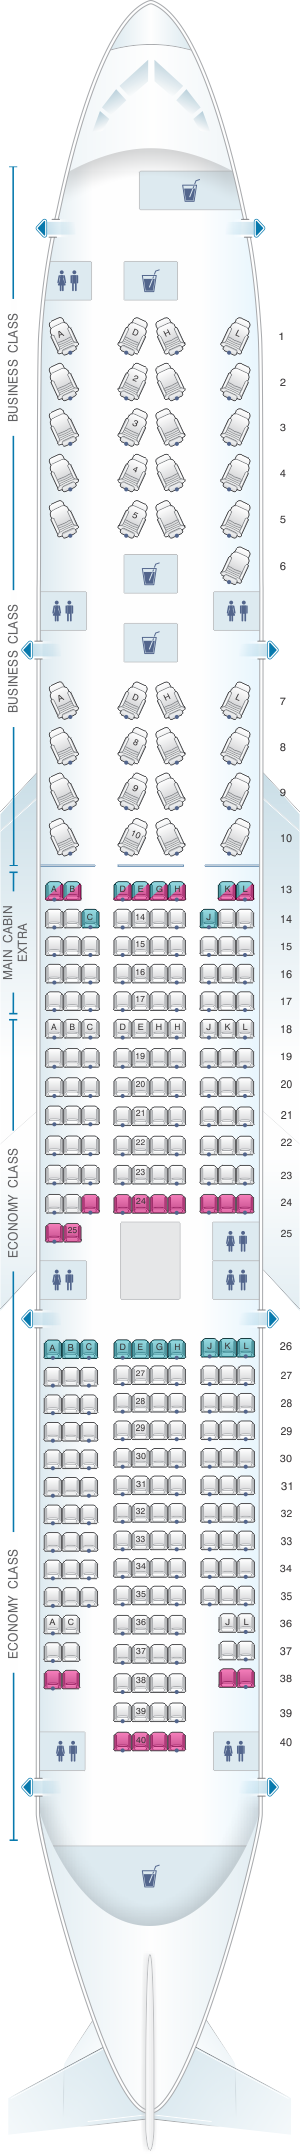 Seat map for American Airlines Boeing B777 200ER 289pax